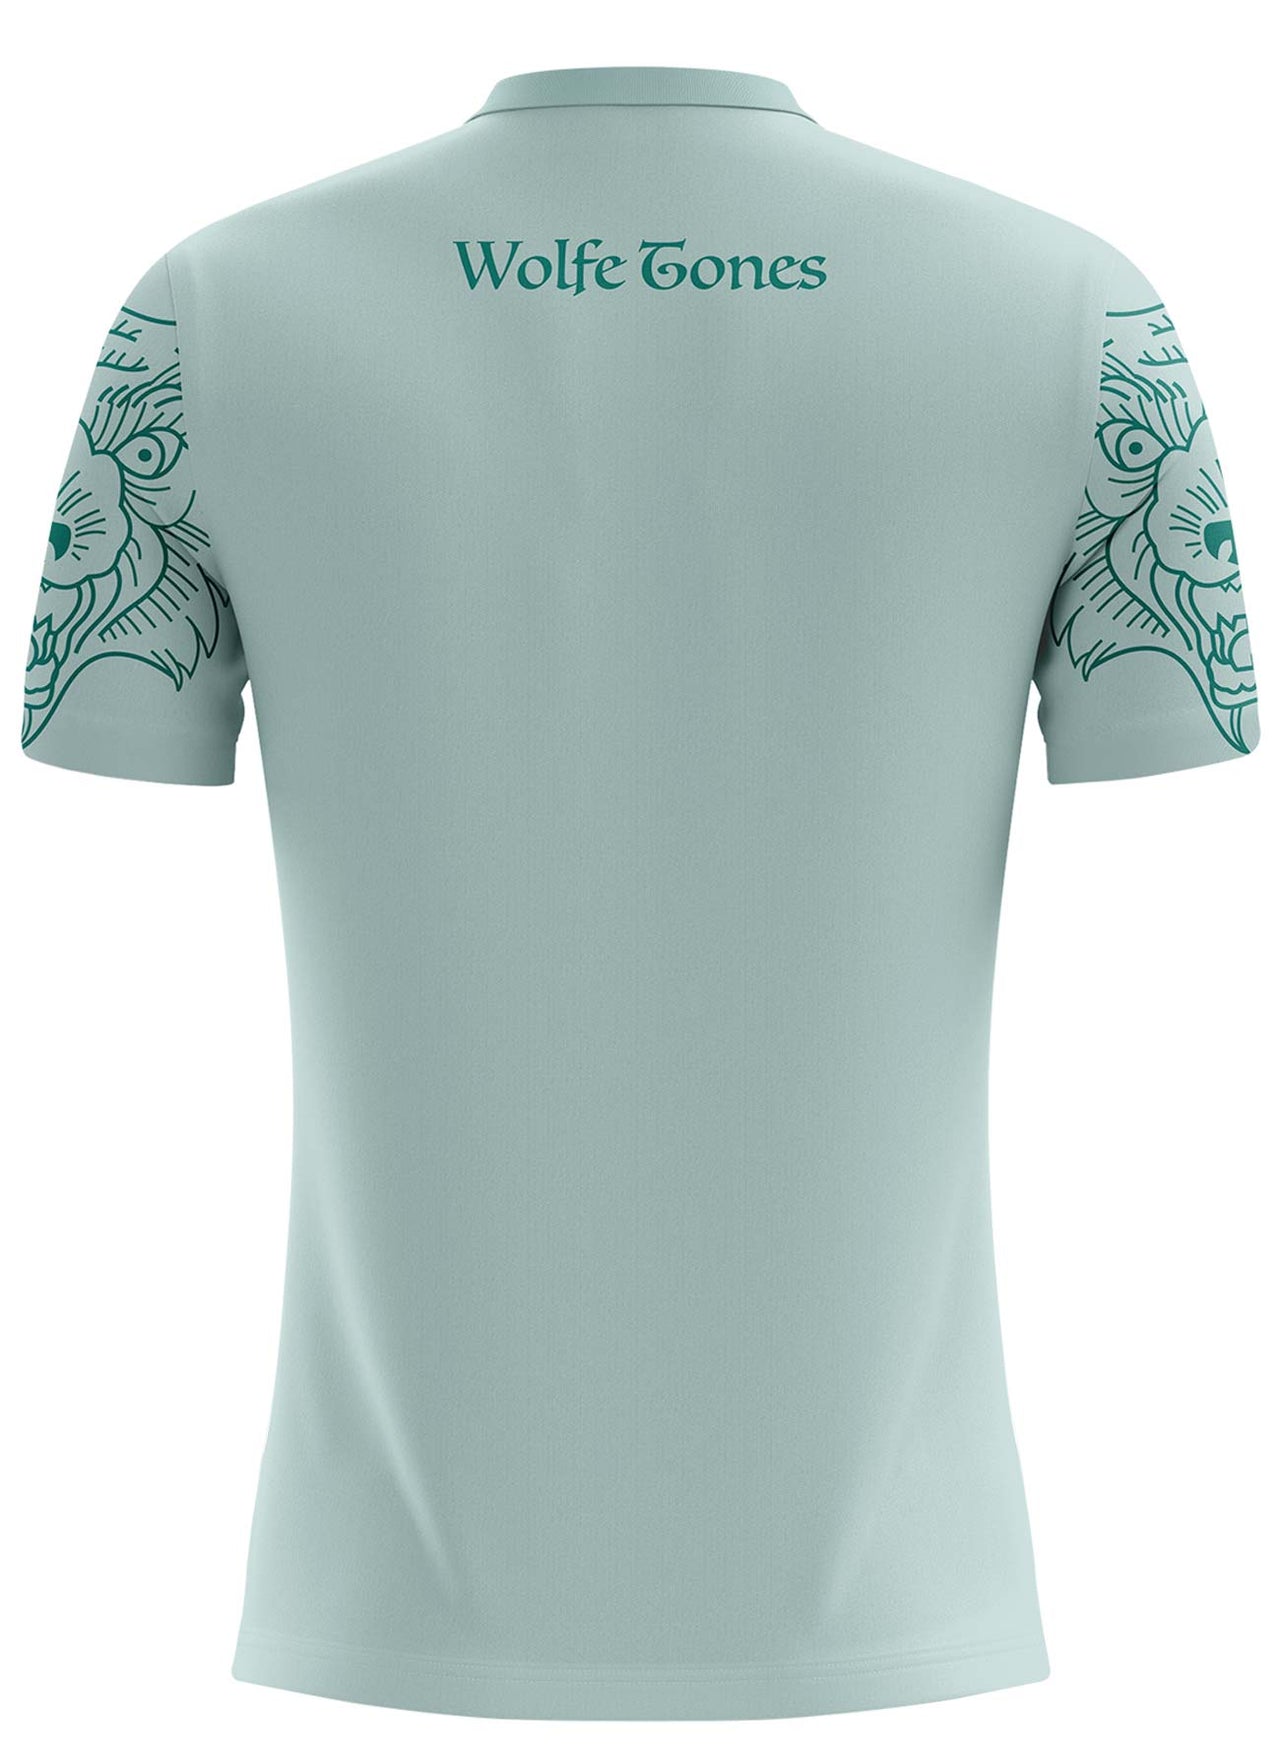 Montana Wolfe Tones GYGO Jersey Player Fit Adult